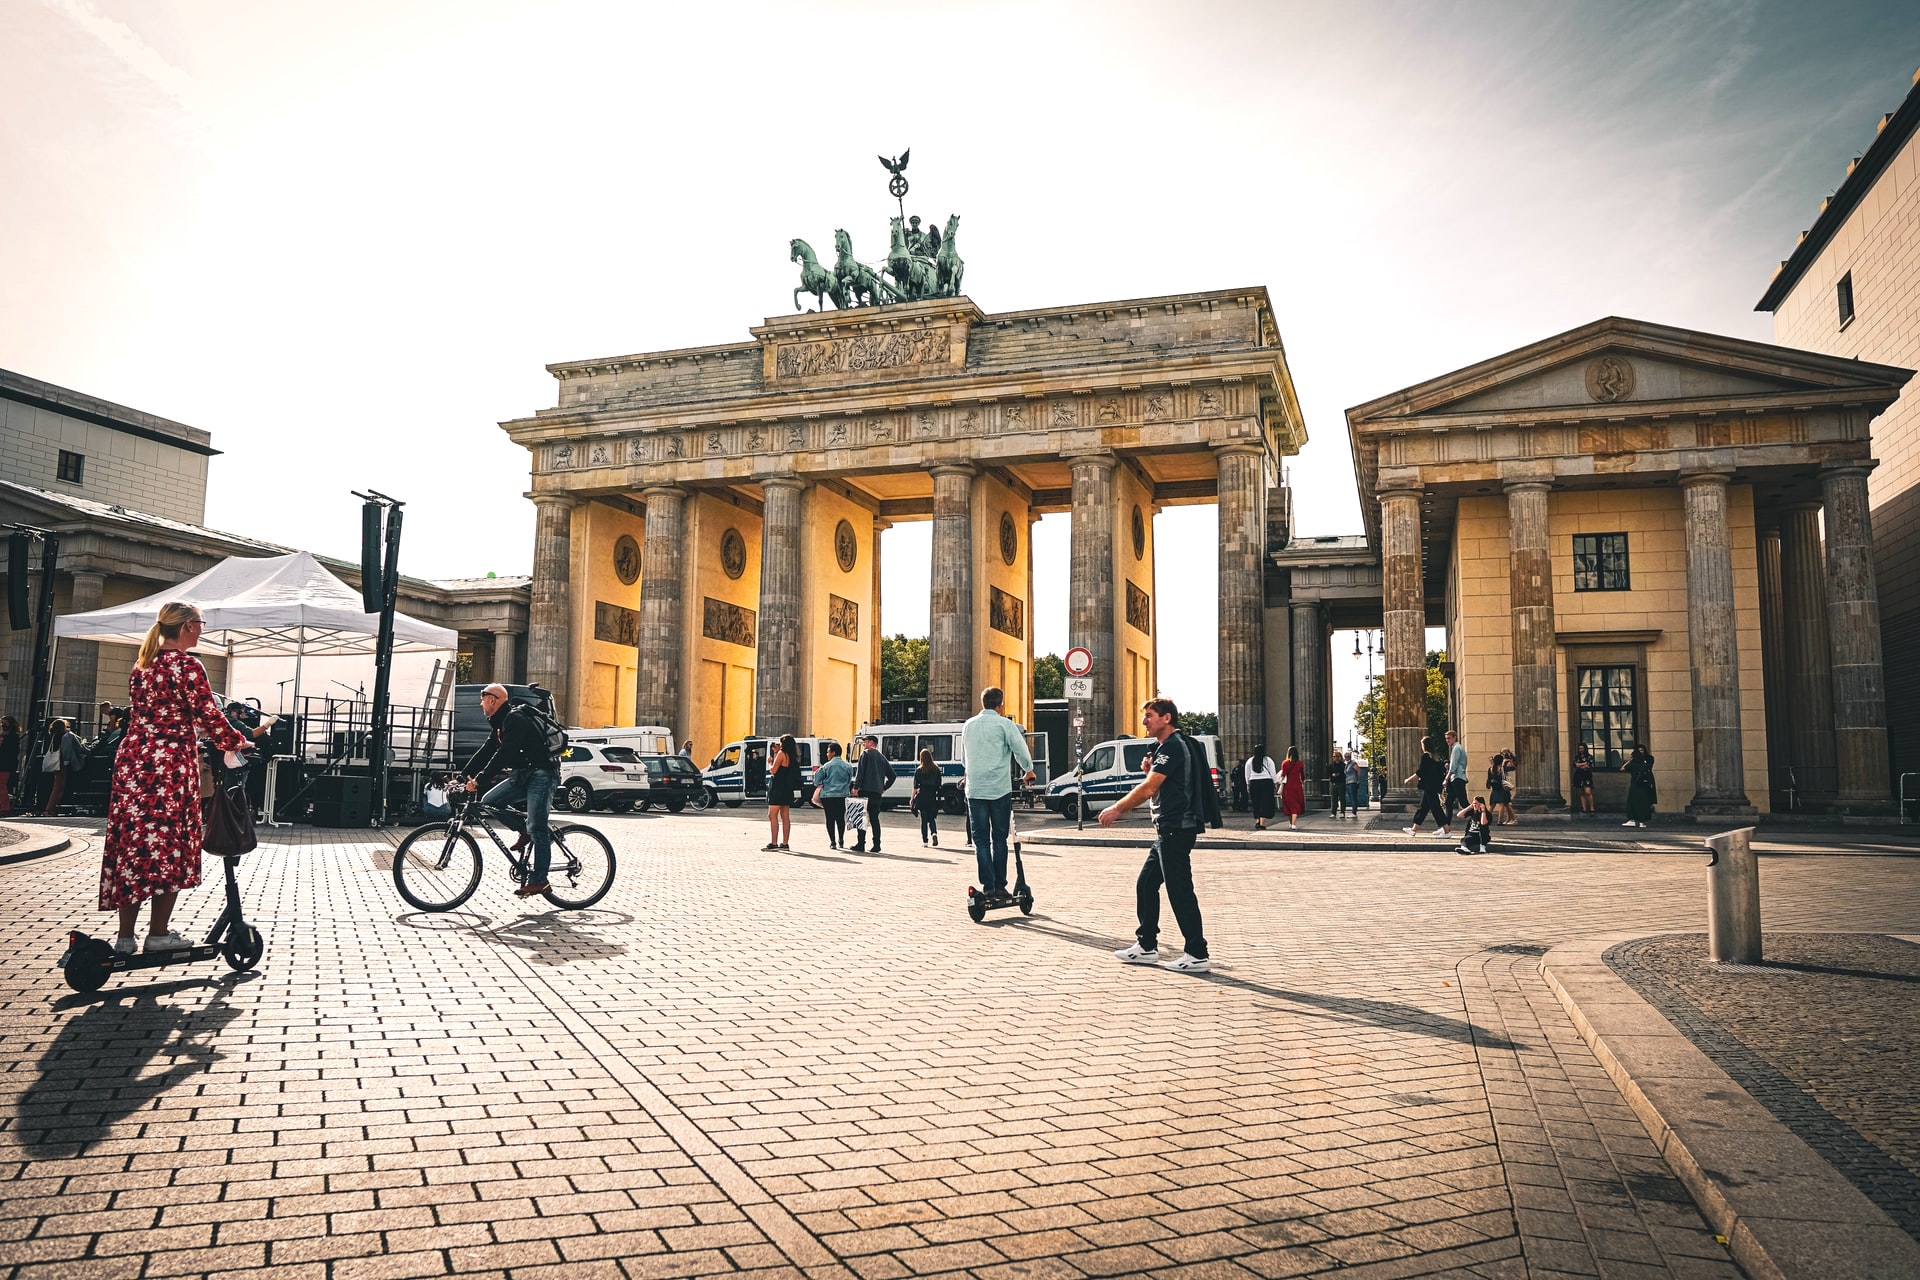 Moving To Berlin? This Is What You Should Know – Part 2